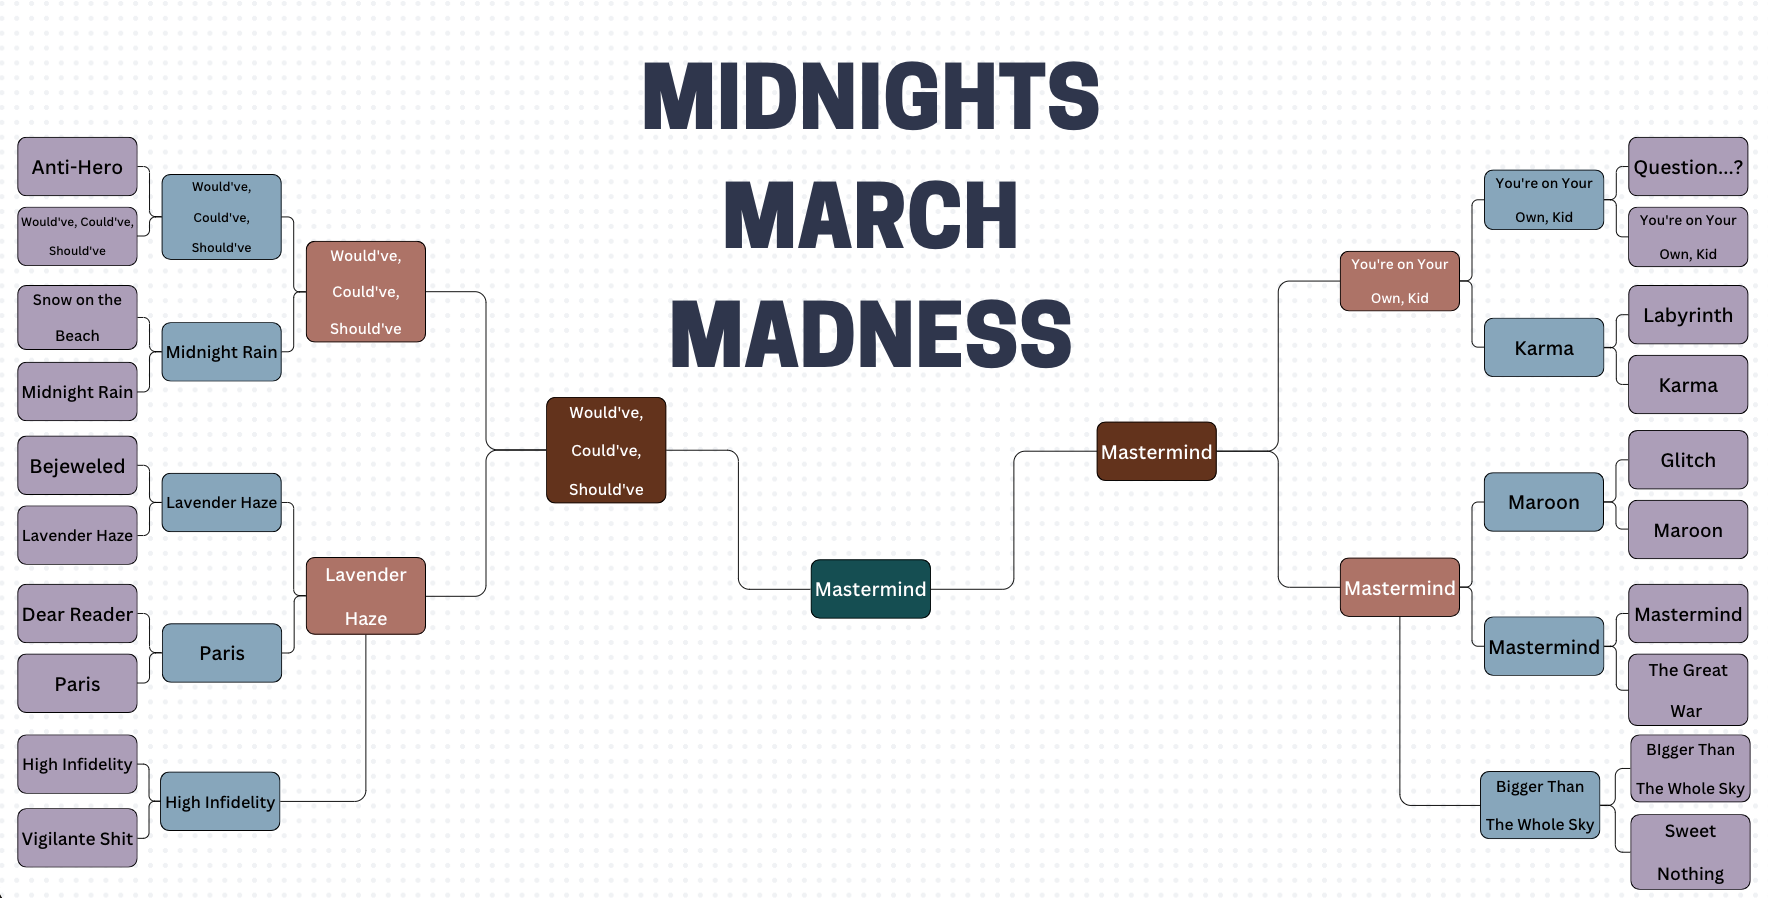 This is a bracket (replicating the March Madness bracket) in order to rank Taylor Swift\'s Midnights album according to my preferences. It was made using Canva.